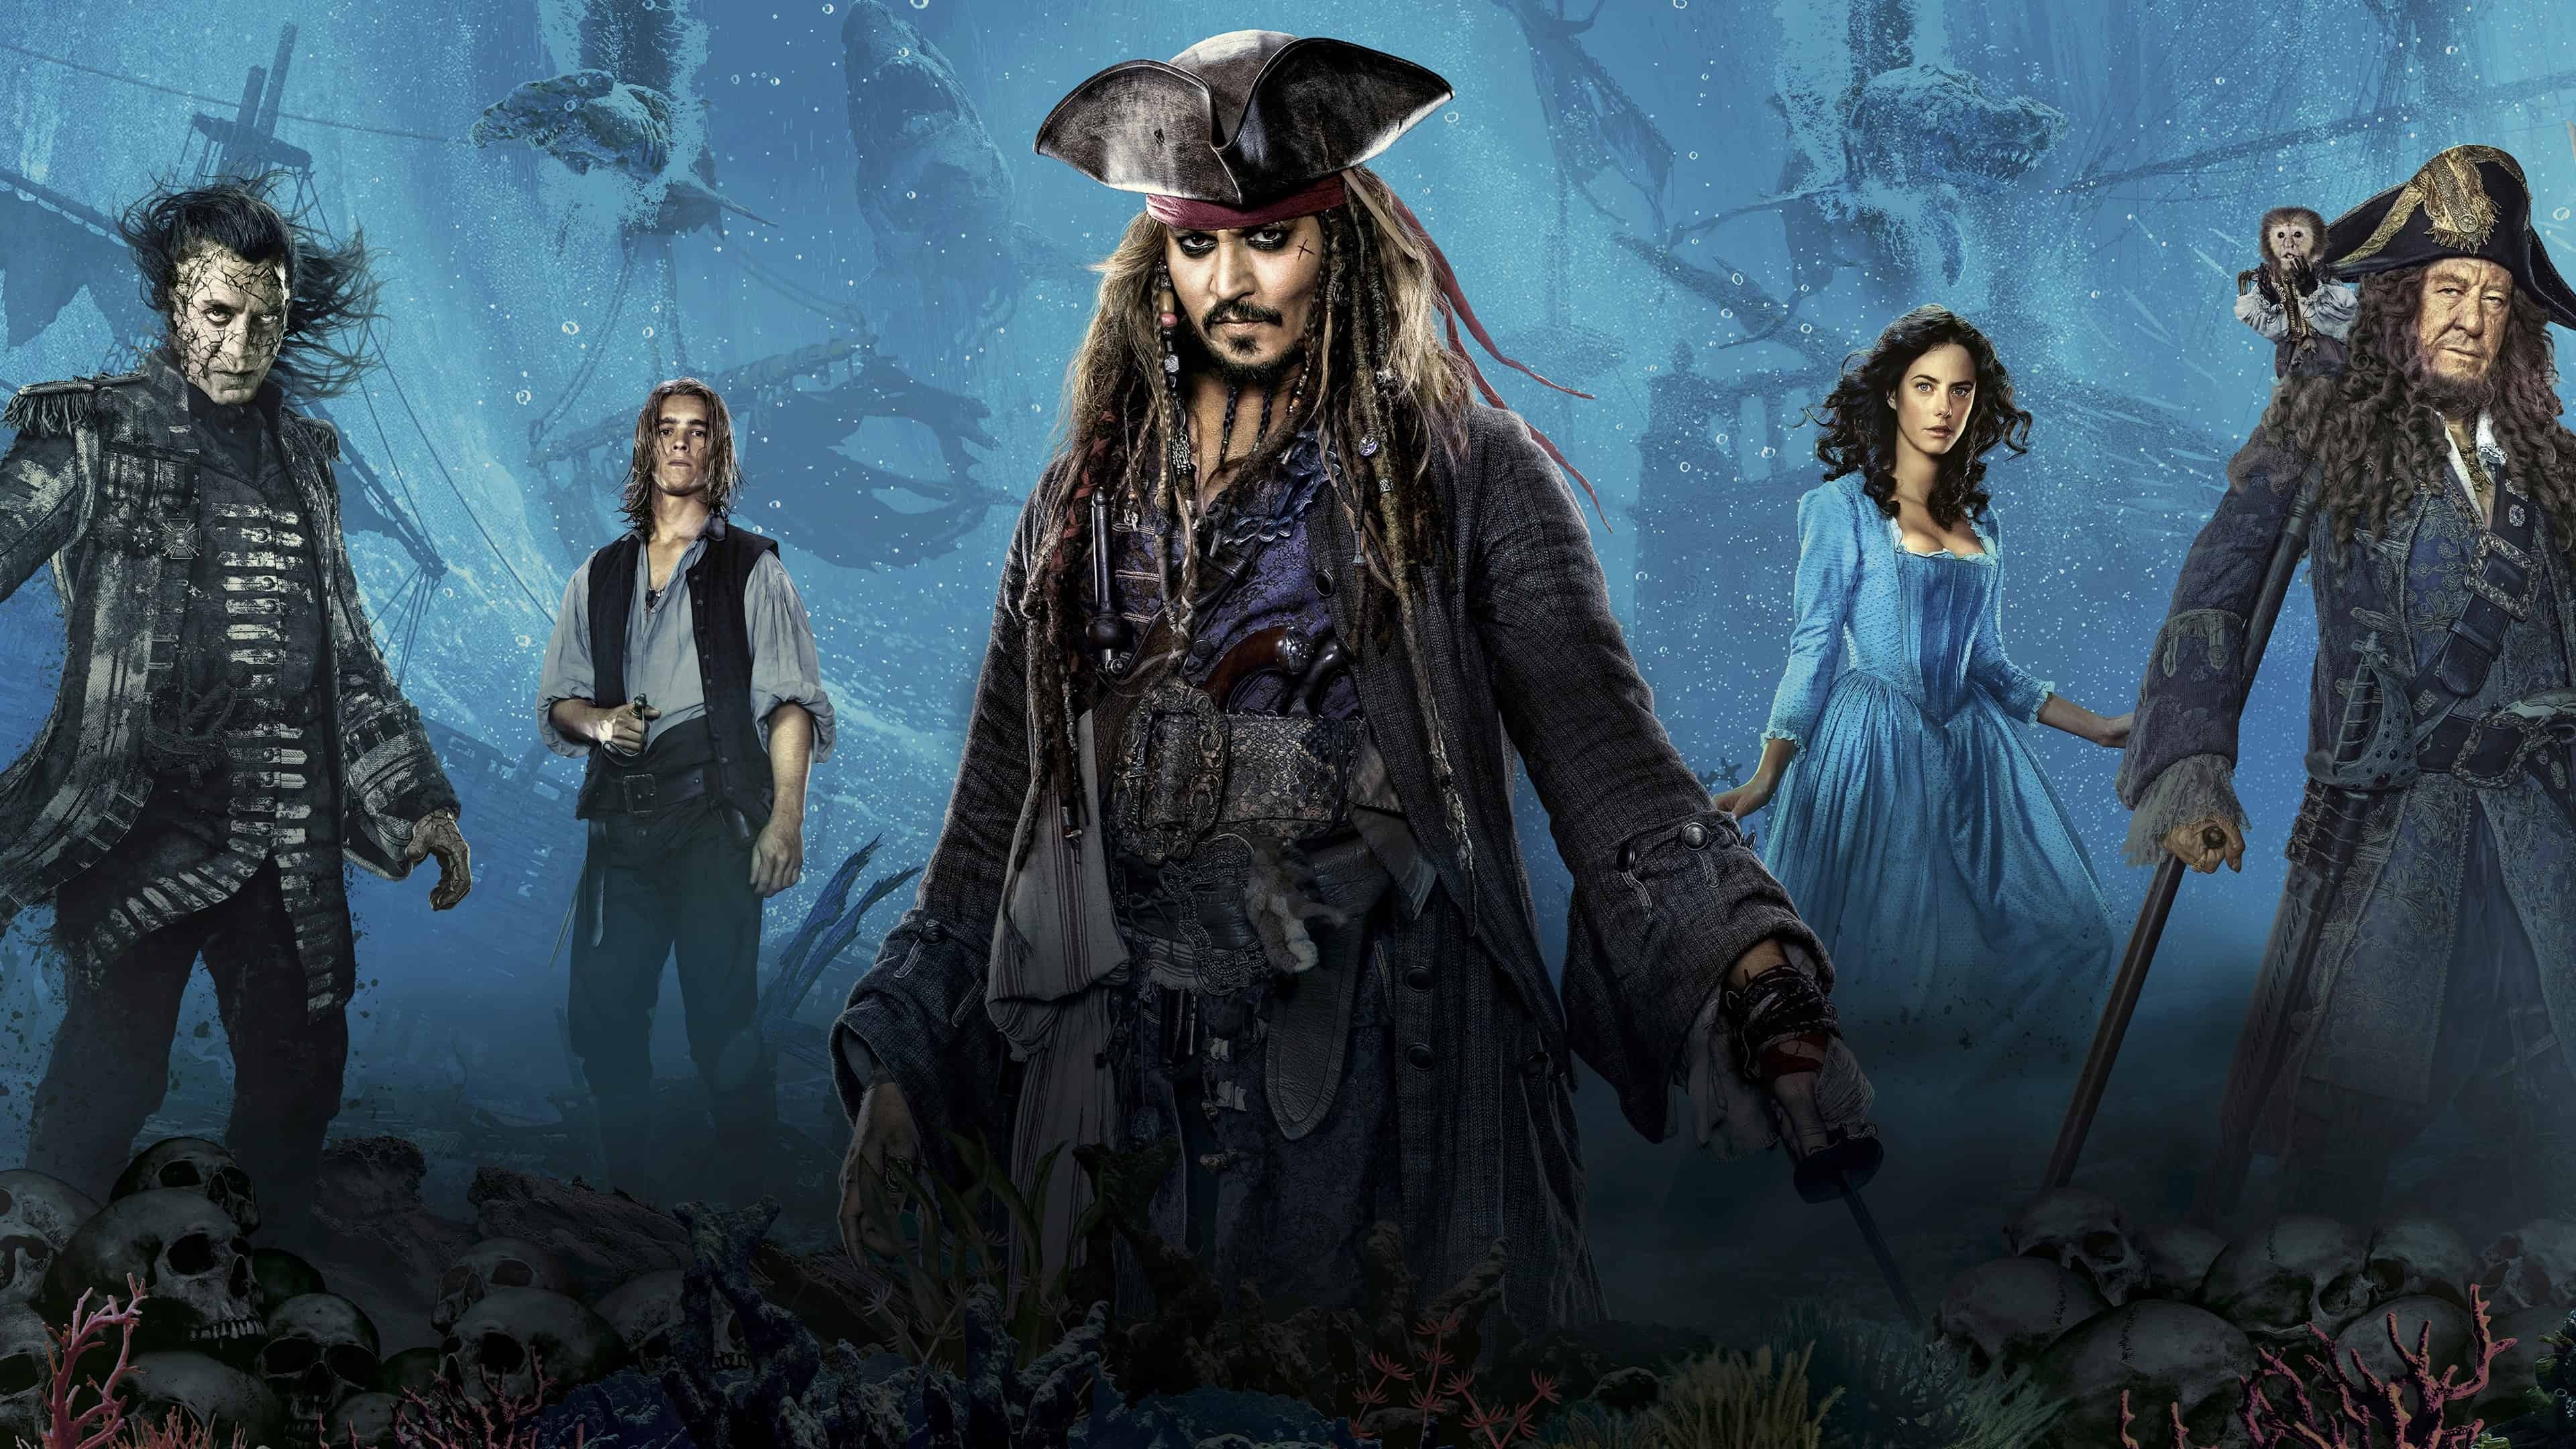 Pirates of the Caribbean: Jack Sparrow, The character created by screenwriters Ted Elliott and Terry Rossio. 3840x2160 4K Wallpaper.